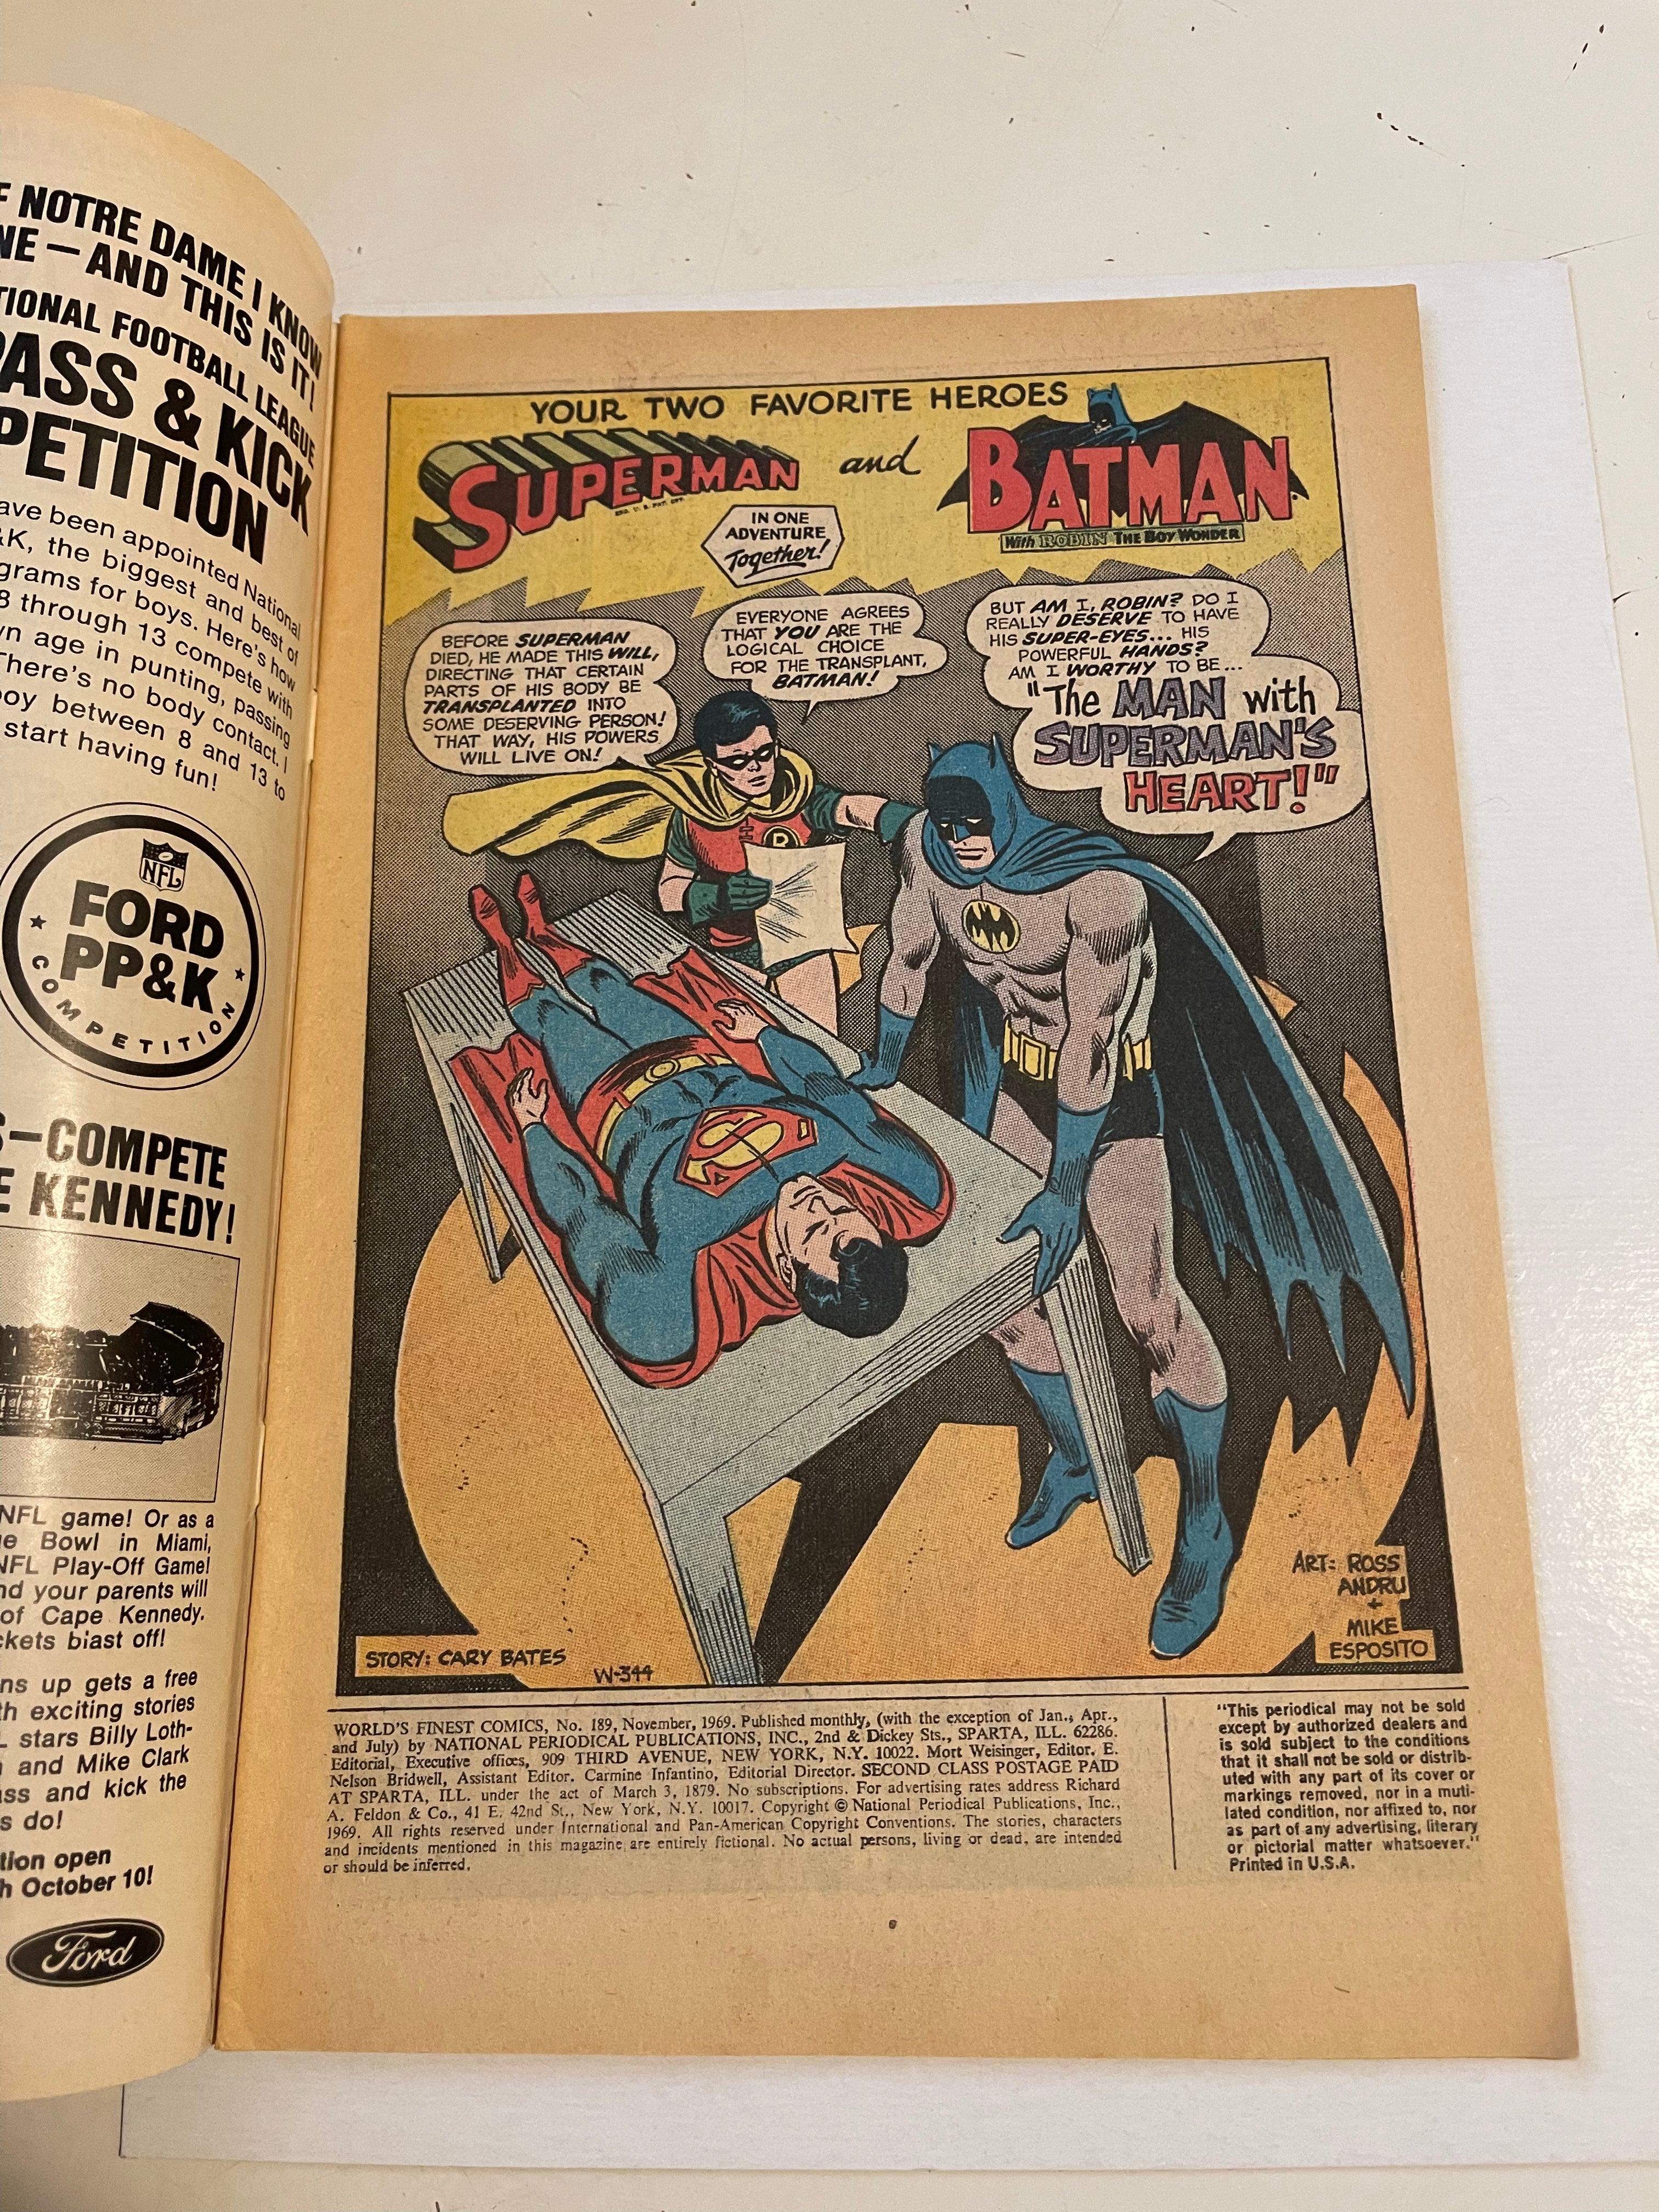 World’s Finest comic #189 vg condition 1969